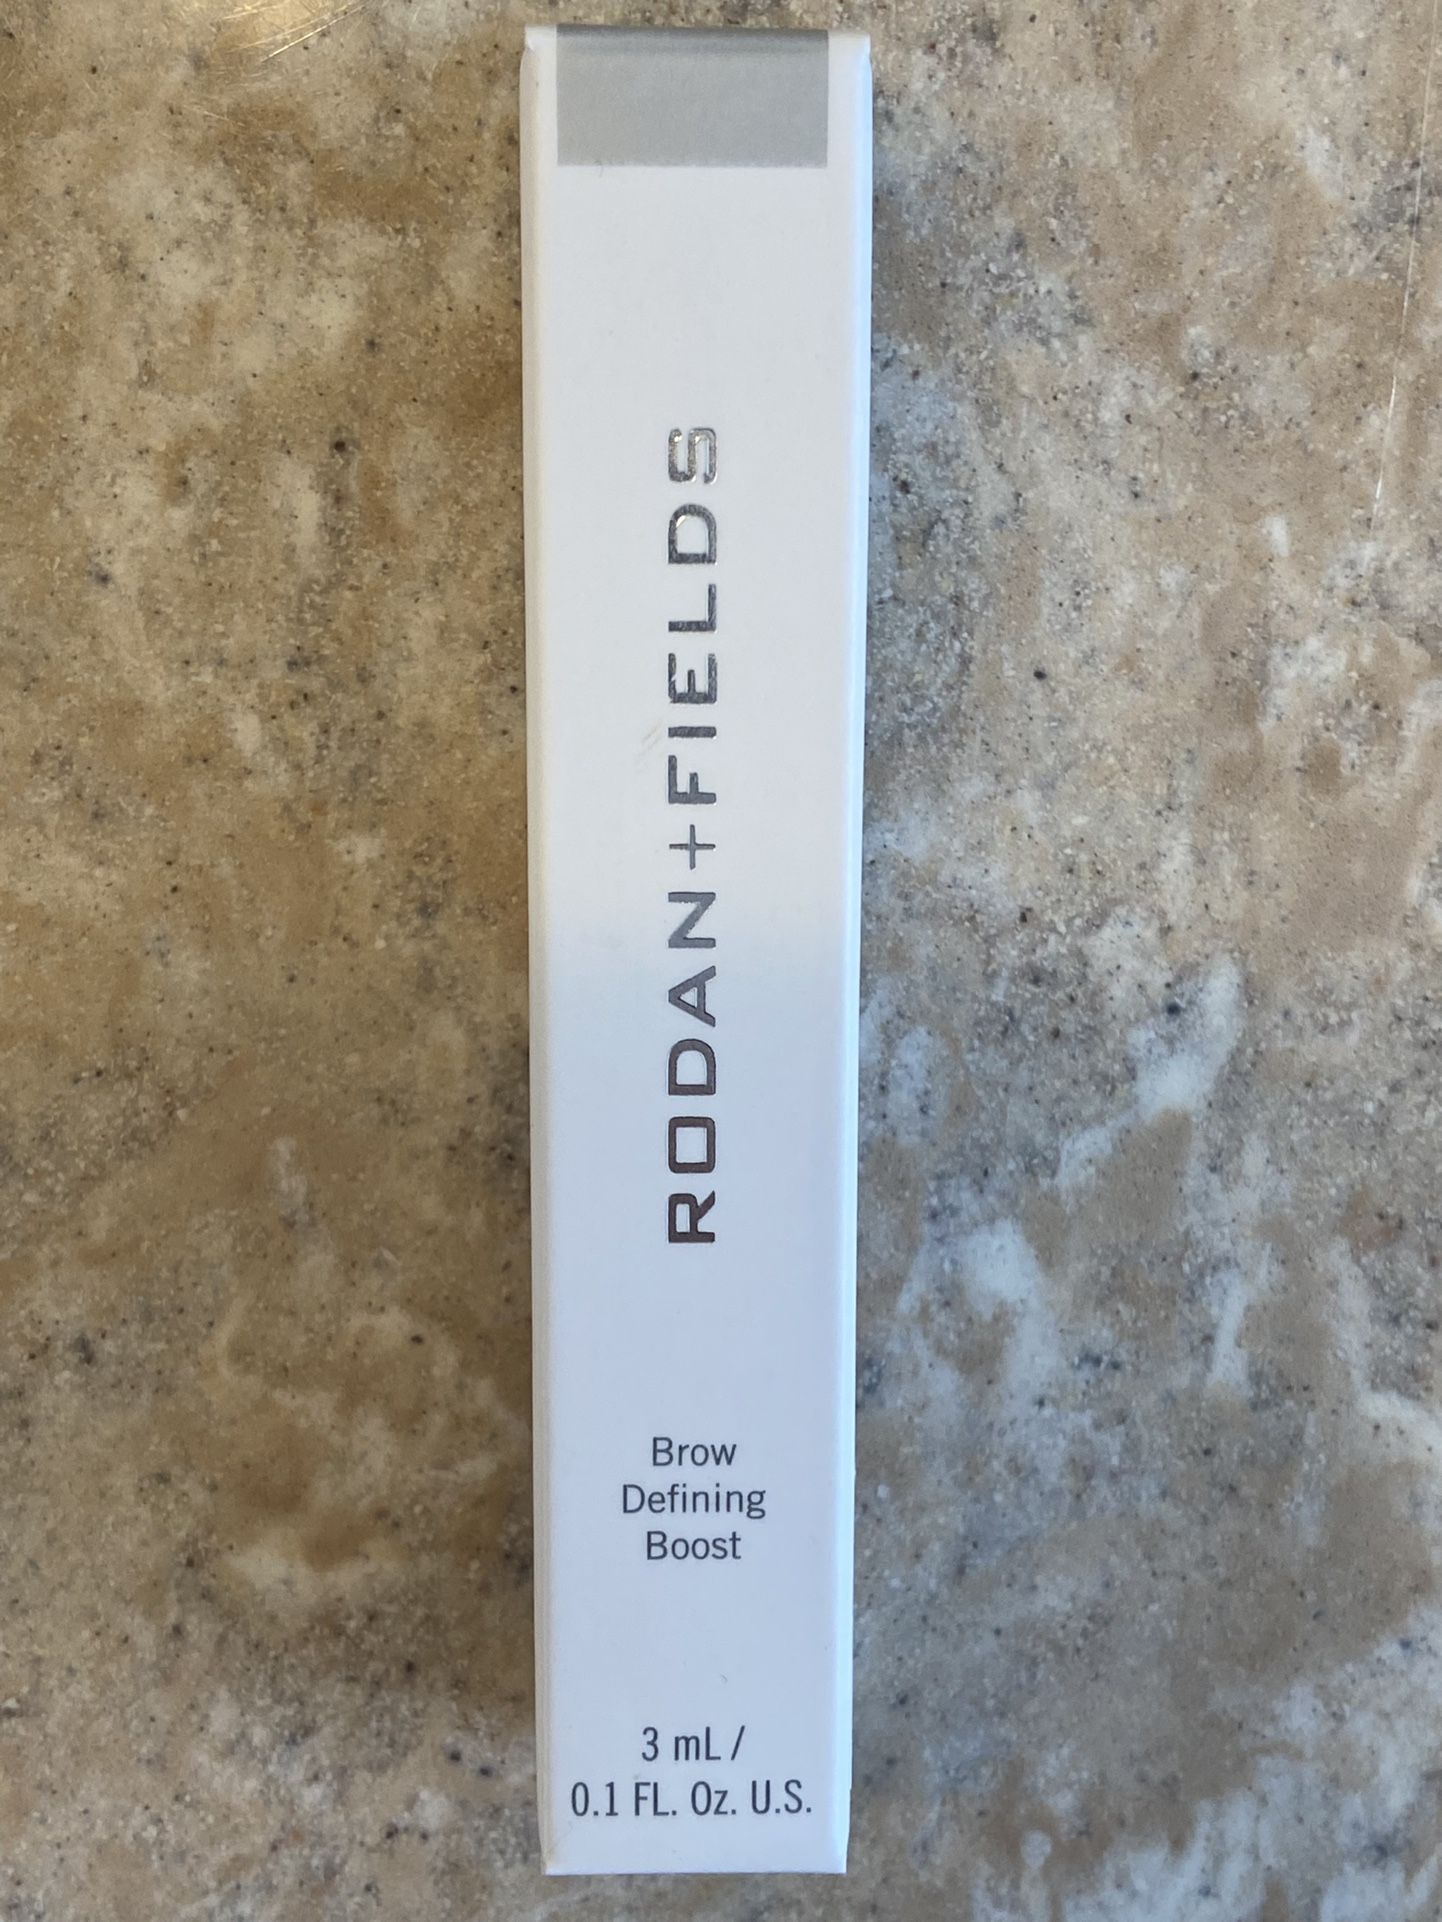 NEW RODAN & FIELDS Brow Defining Boost. Light  New In Box/ Unopened. Porch Pick Up In Dublin  